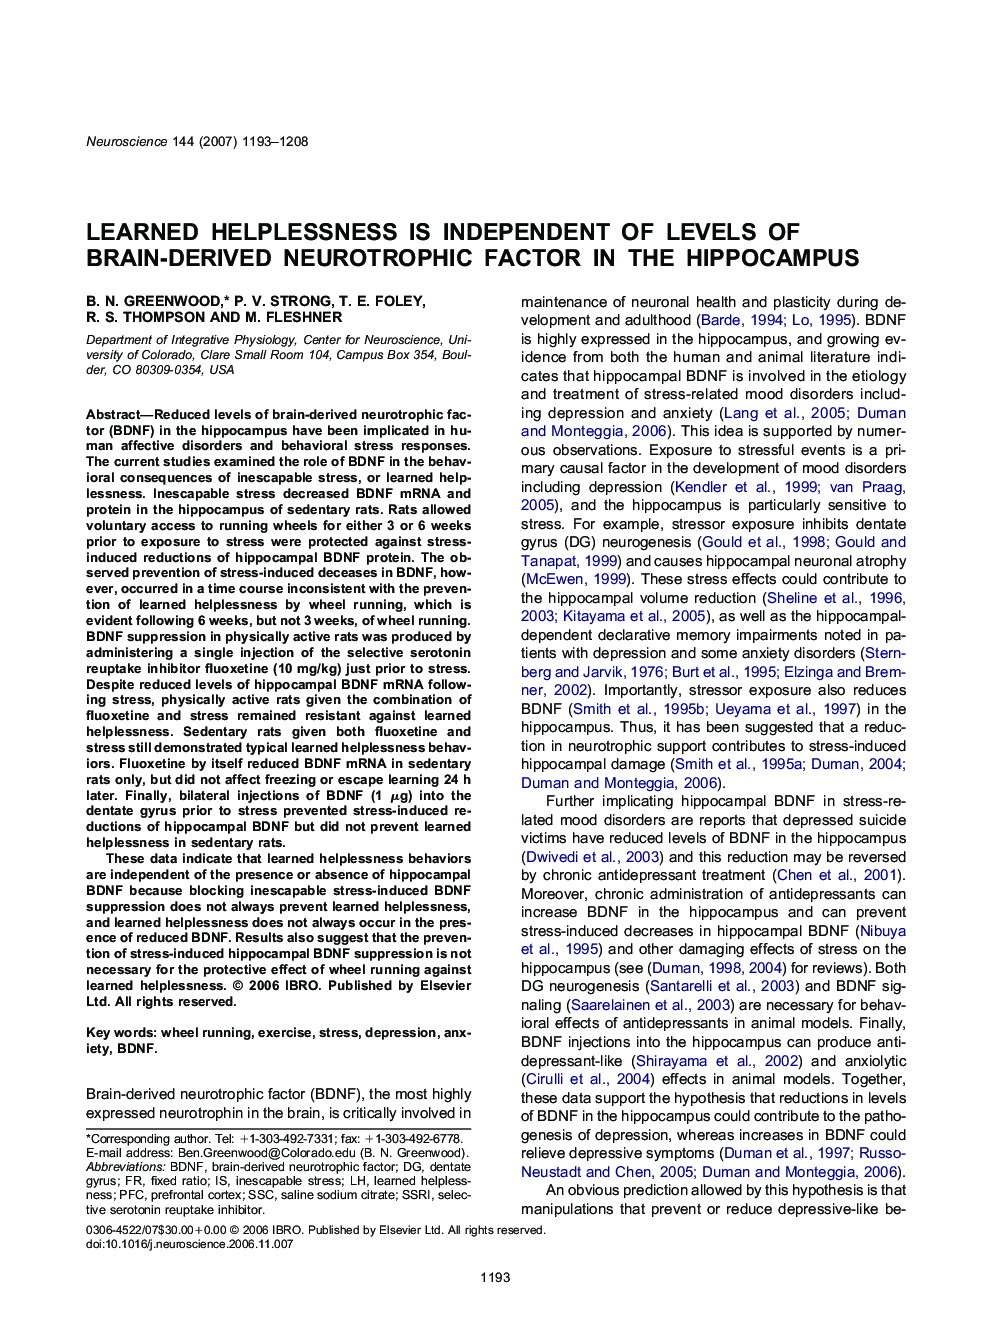 Learned helplessness is independent of levels of brain-derived neurotrophic factor in the hippocampus